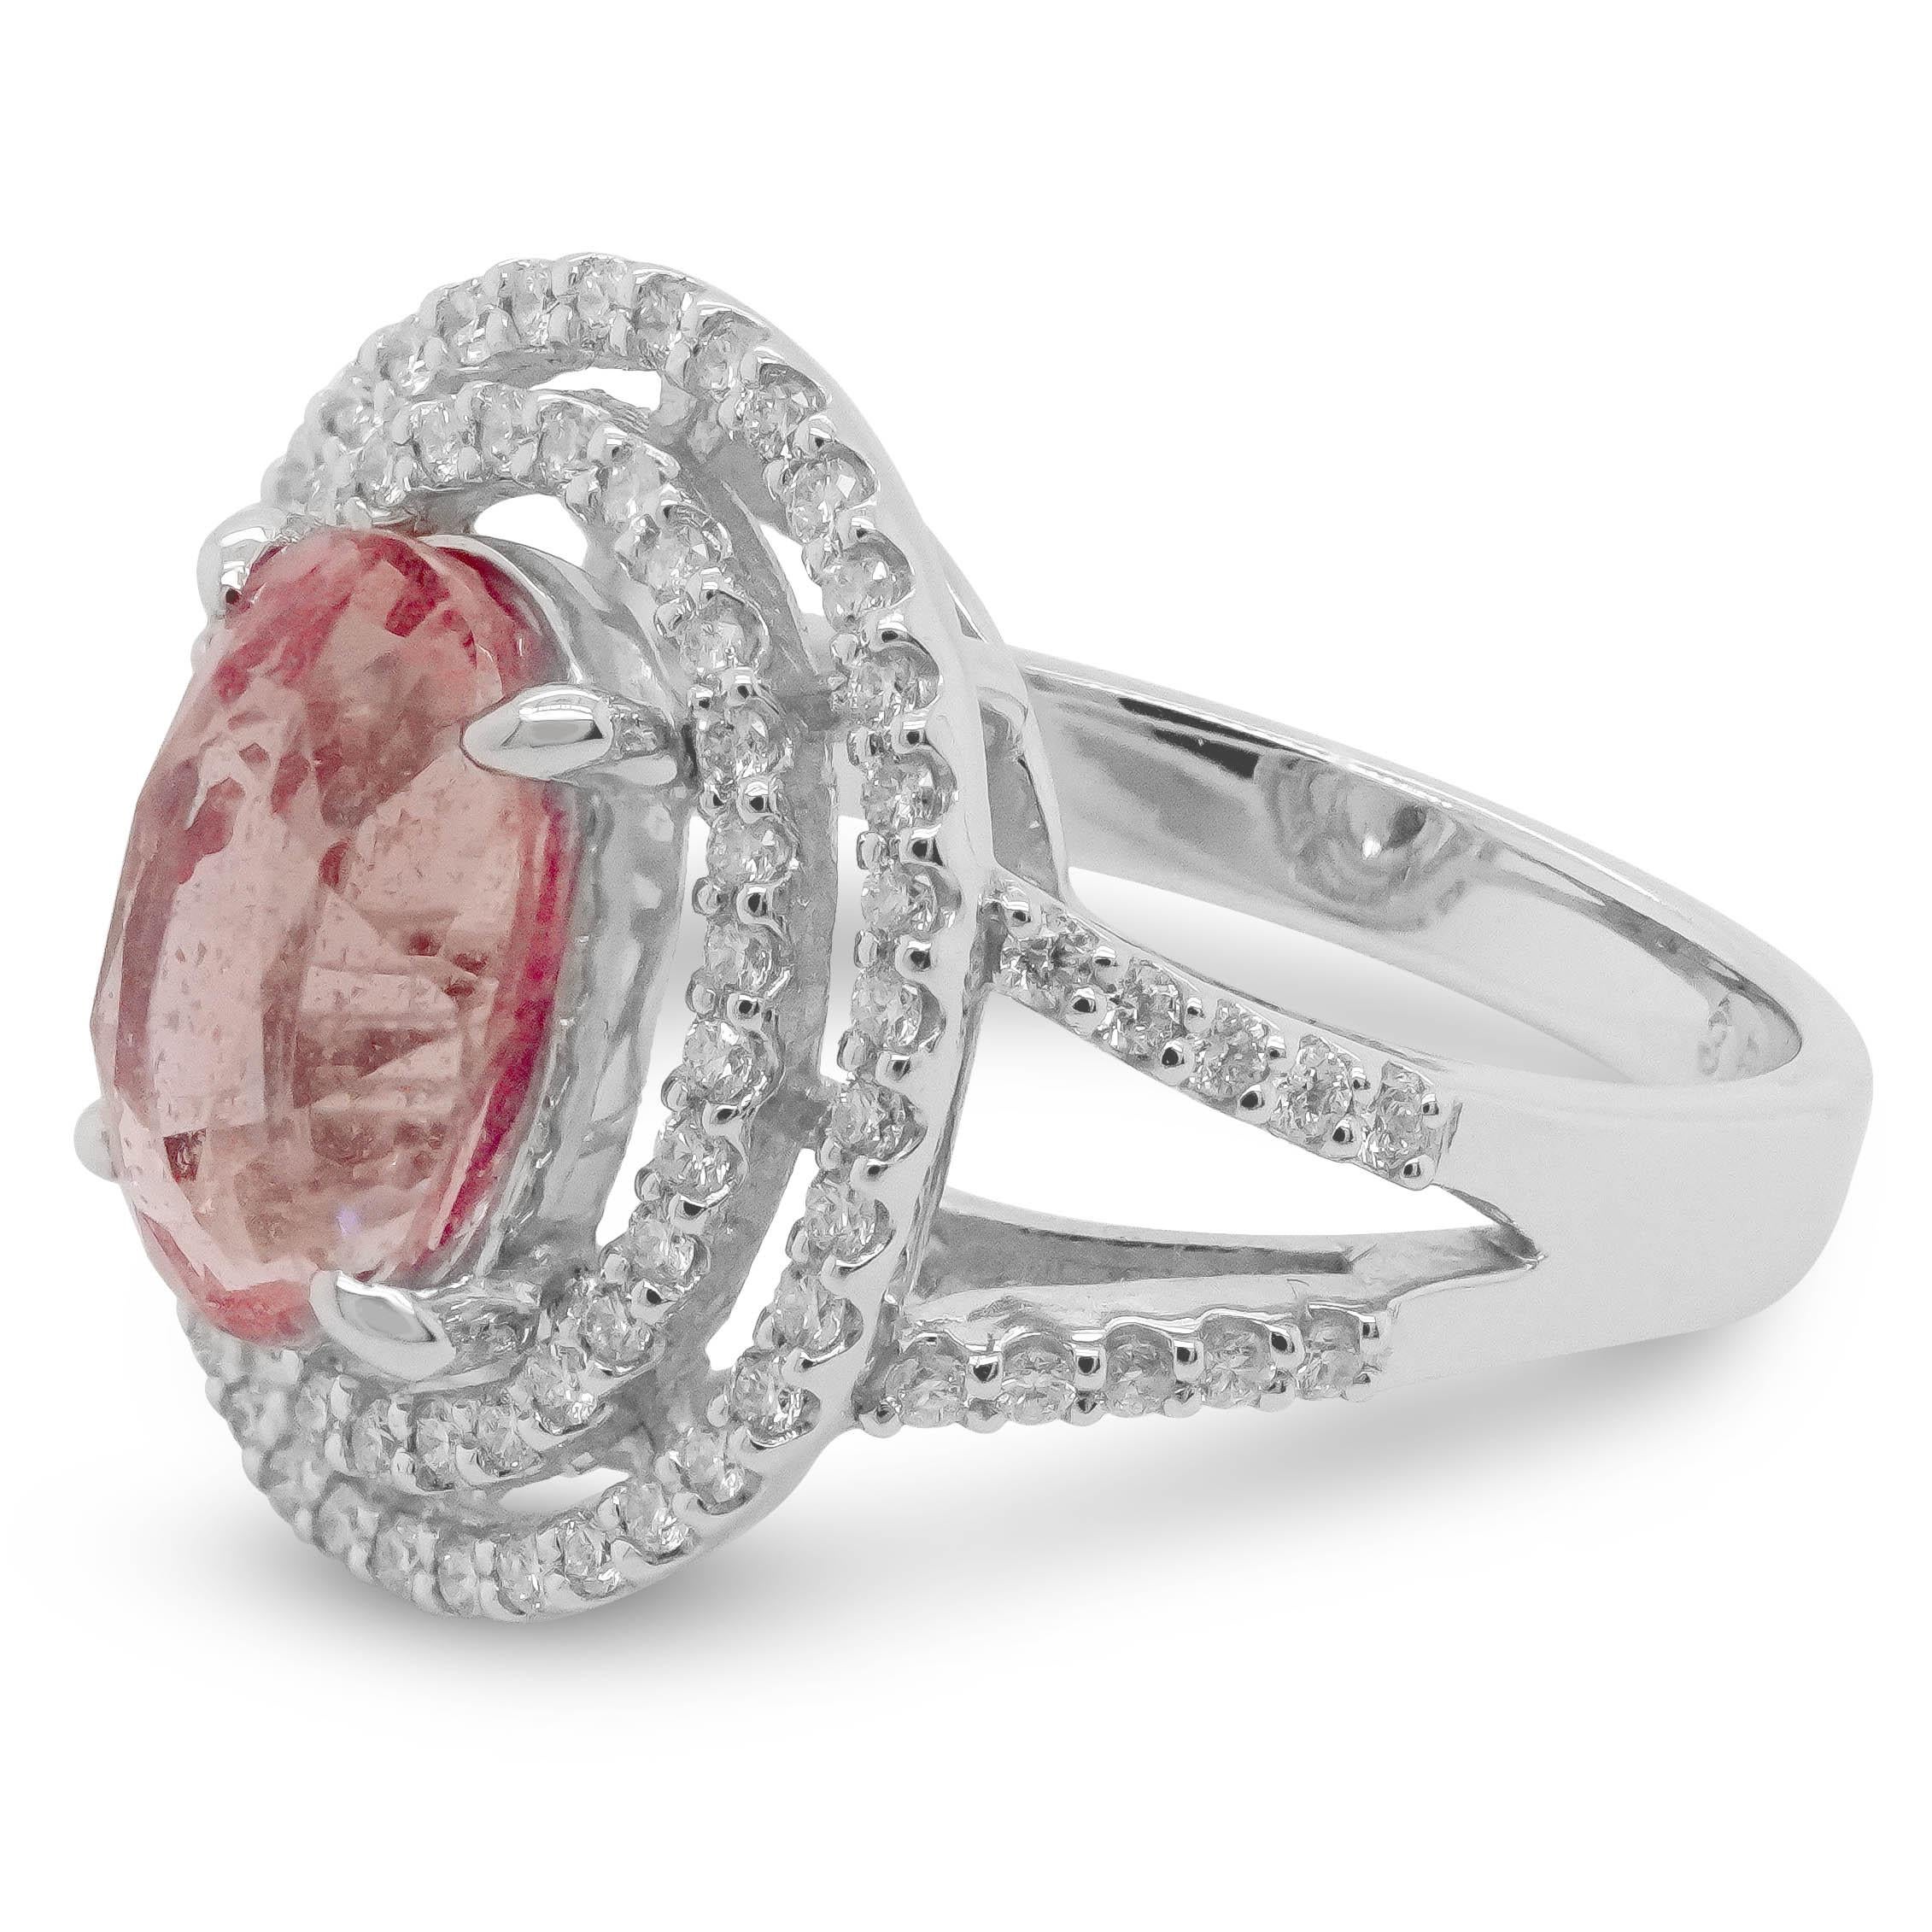 Padparadscha sapphire is a special variety of gem corundum, featuring a delicate color that is a mixture of pink and orange – a marriage between ruby and yellow sapphire. The ring consists of AGL Certified 3.51 carat of Padparadscha Sapphire and